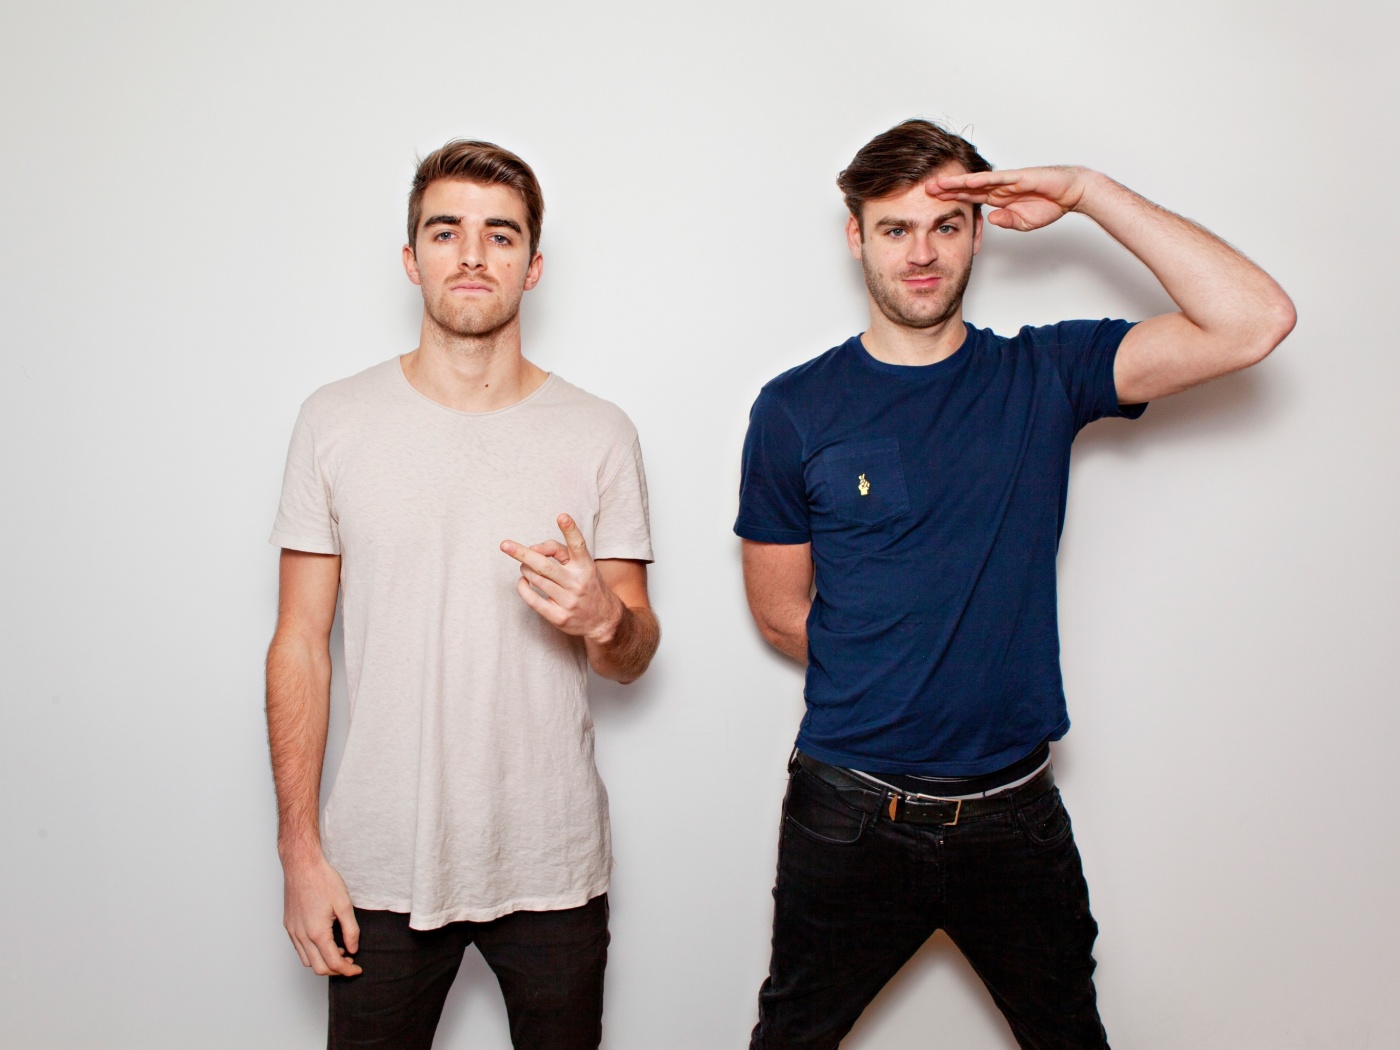 The Chainsmokers with Andrew Taggart and Alex Pall screenshot #1 1400x1050